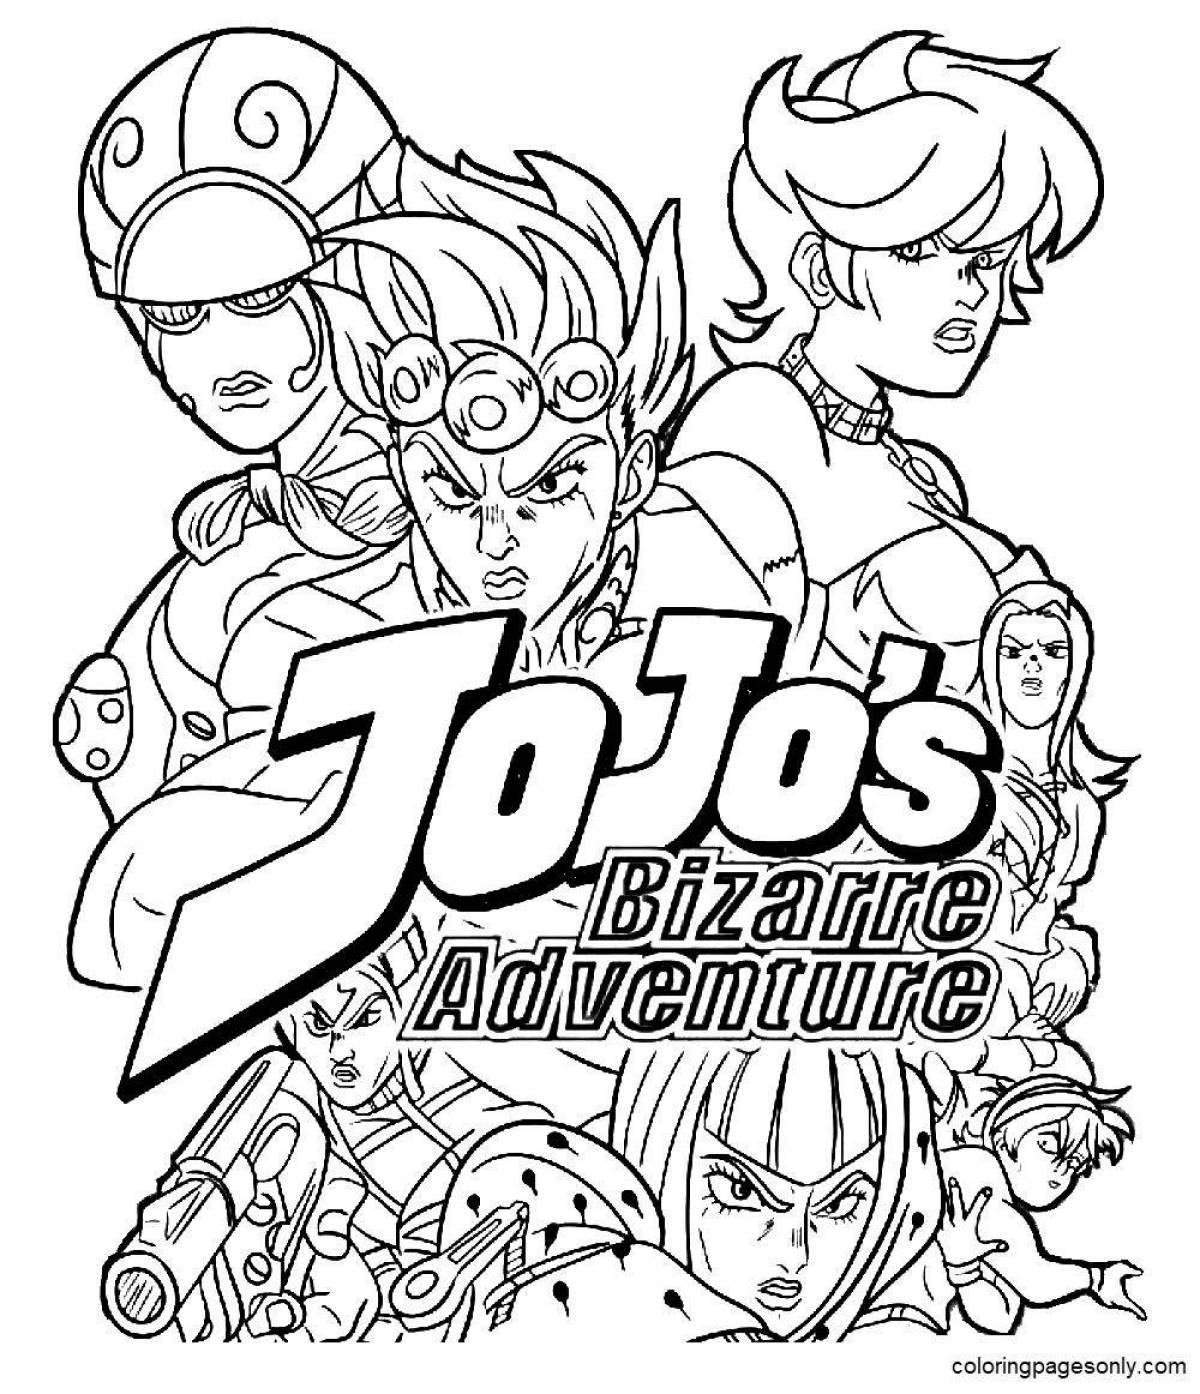 Jolene's awesome coloring book